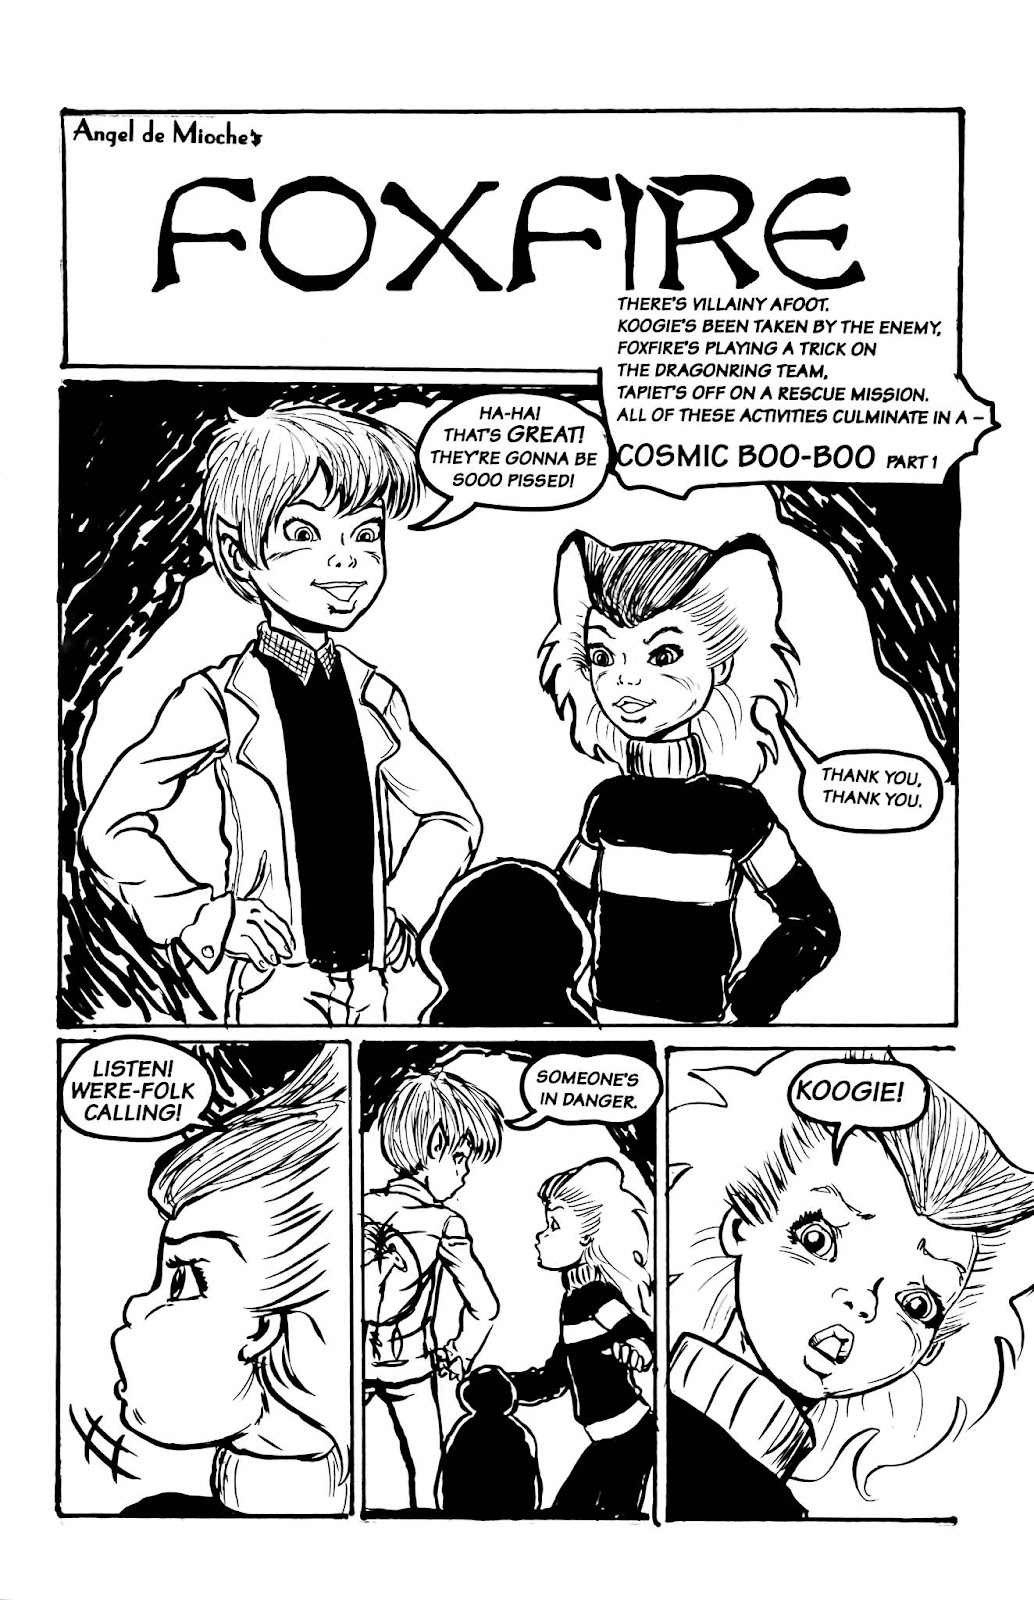 Elflore: High Seas issue 4 - Page 22